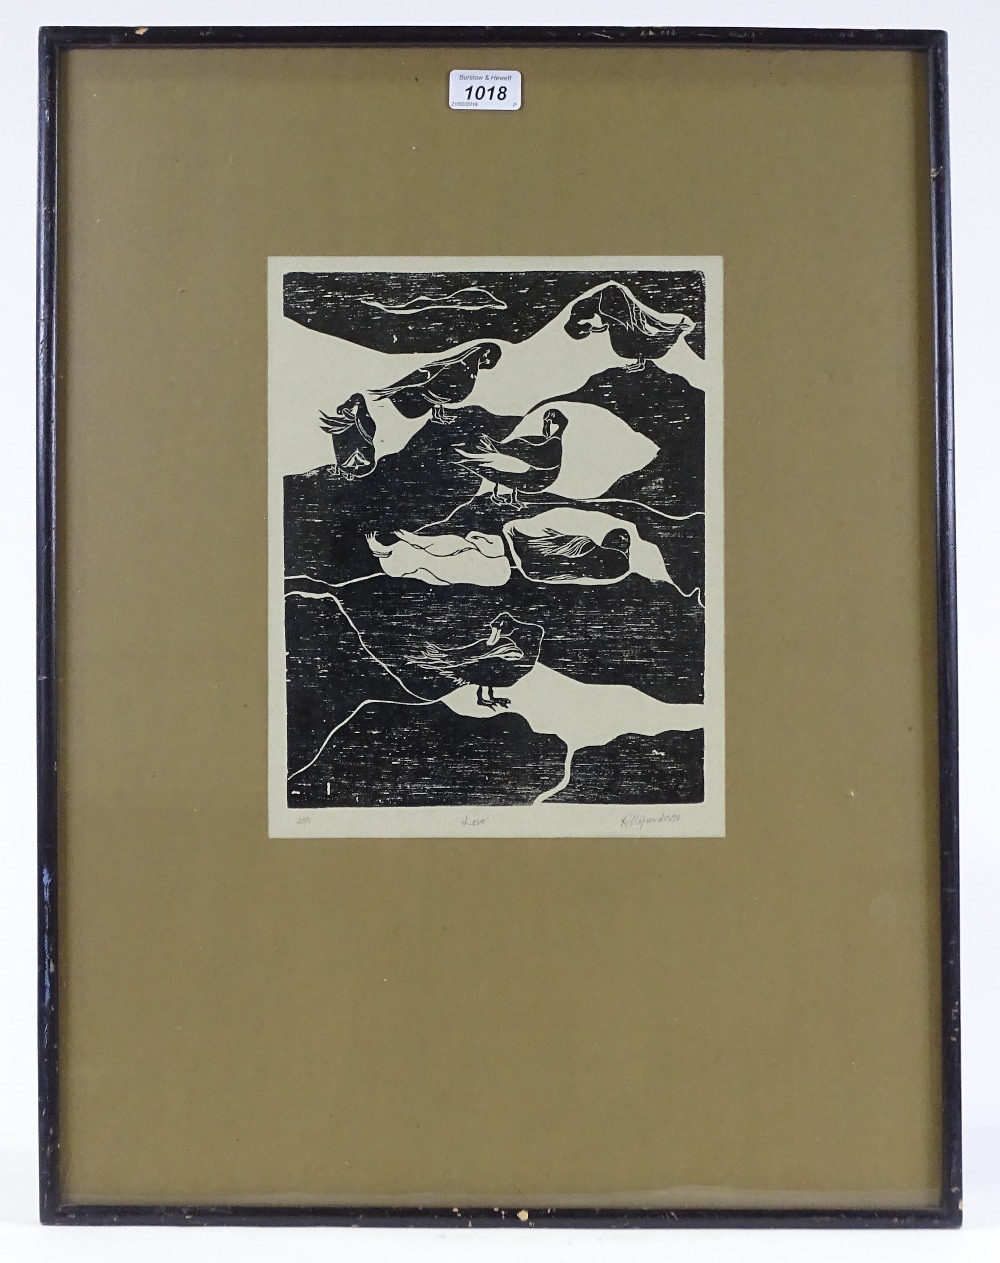 Woodcut print, Love, indistinctly signed in pencil, 1978, image size 11.5" x 9", framed - Image 2 of 4